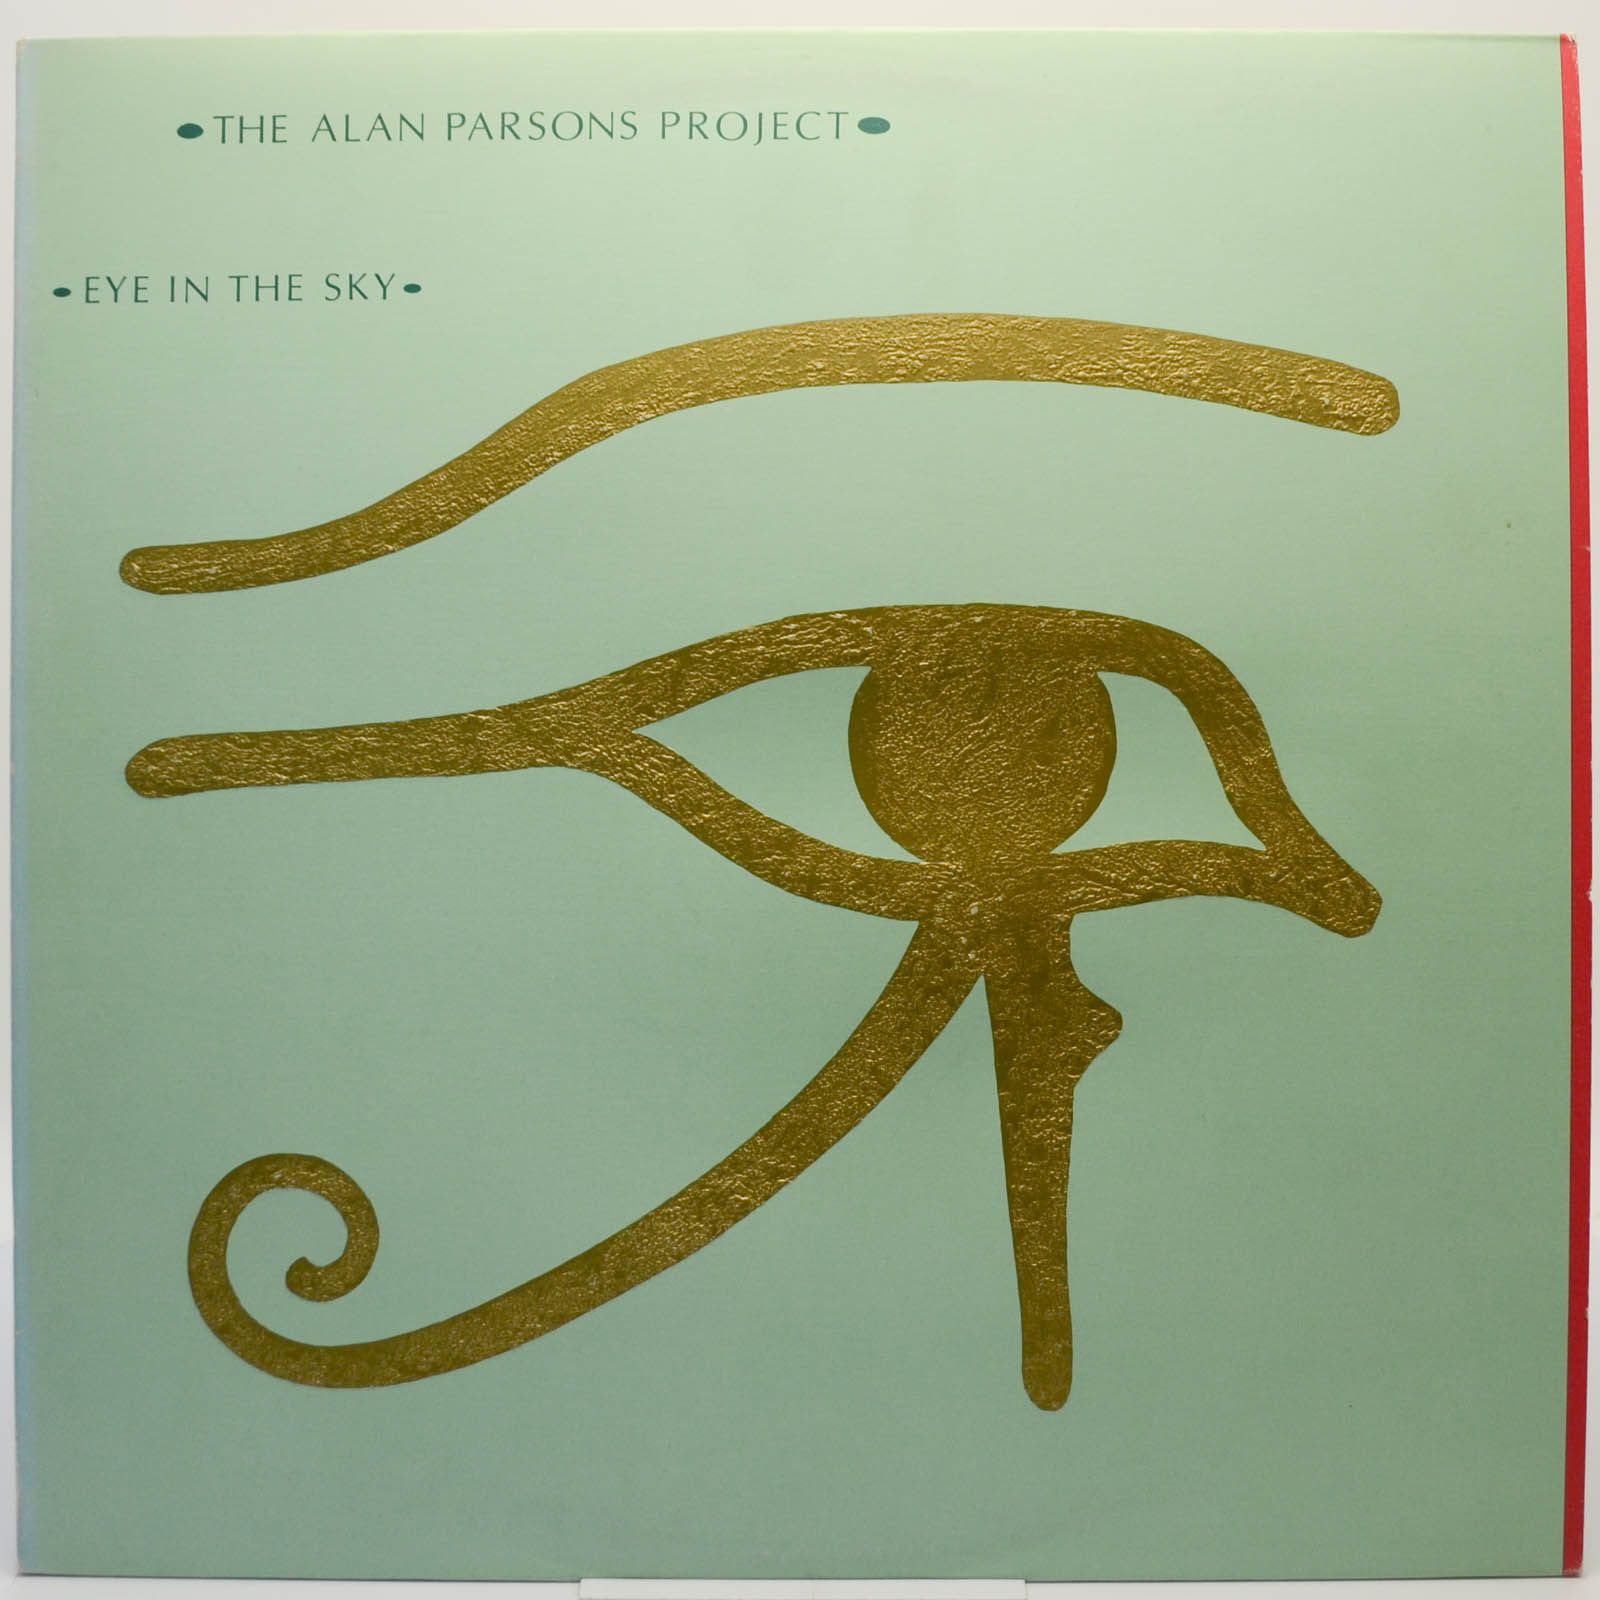 Alan Parsons Project — Eye In The Sky, 1982